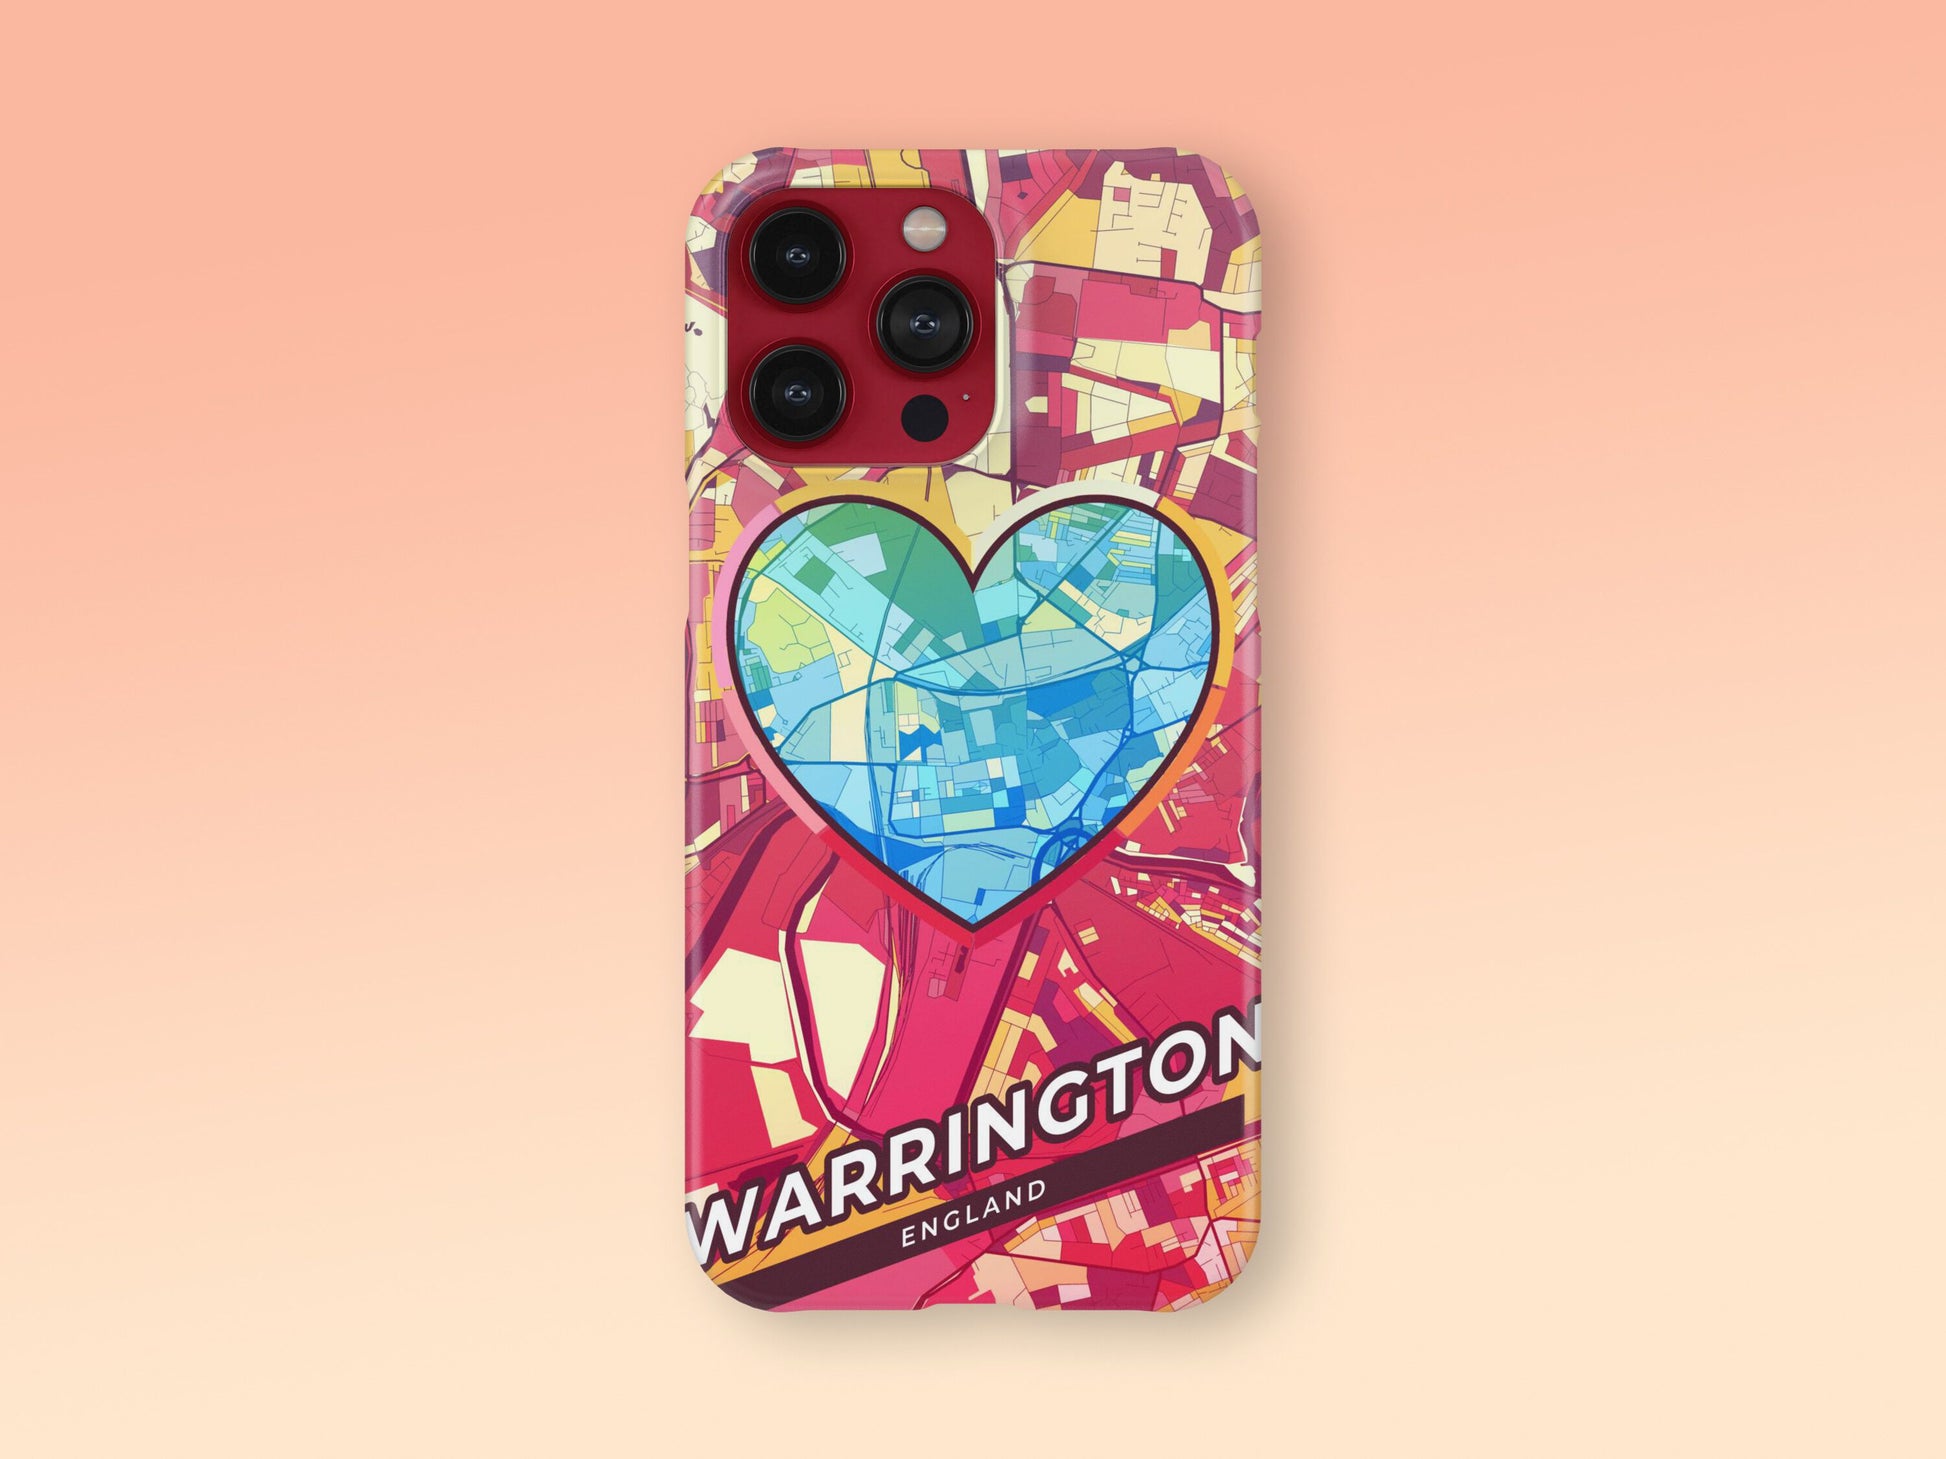 Warrington England slim phone case with colorful icon. Birthday, wedding or housewarming gift. Couple match cases. 2